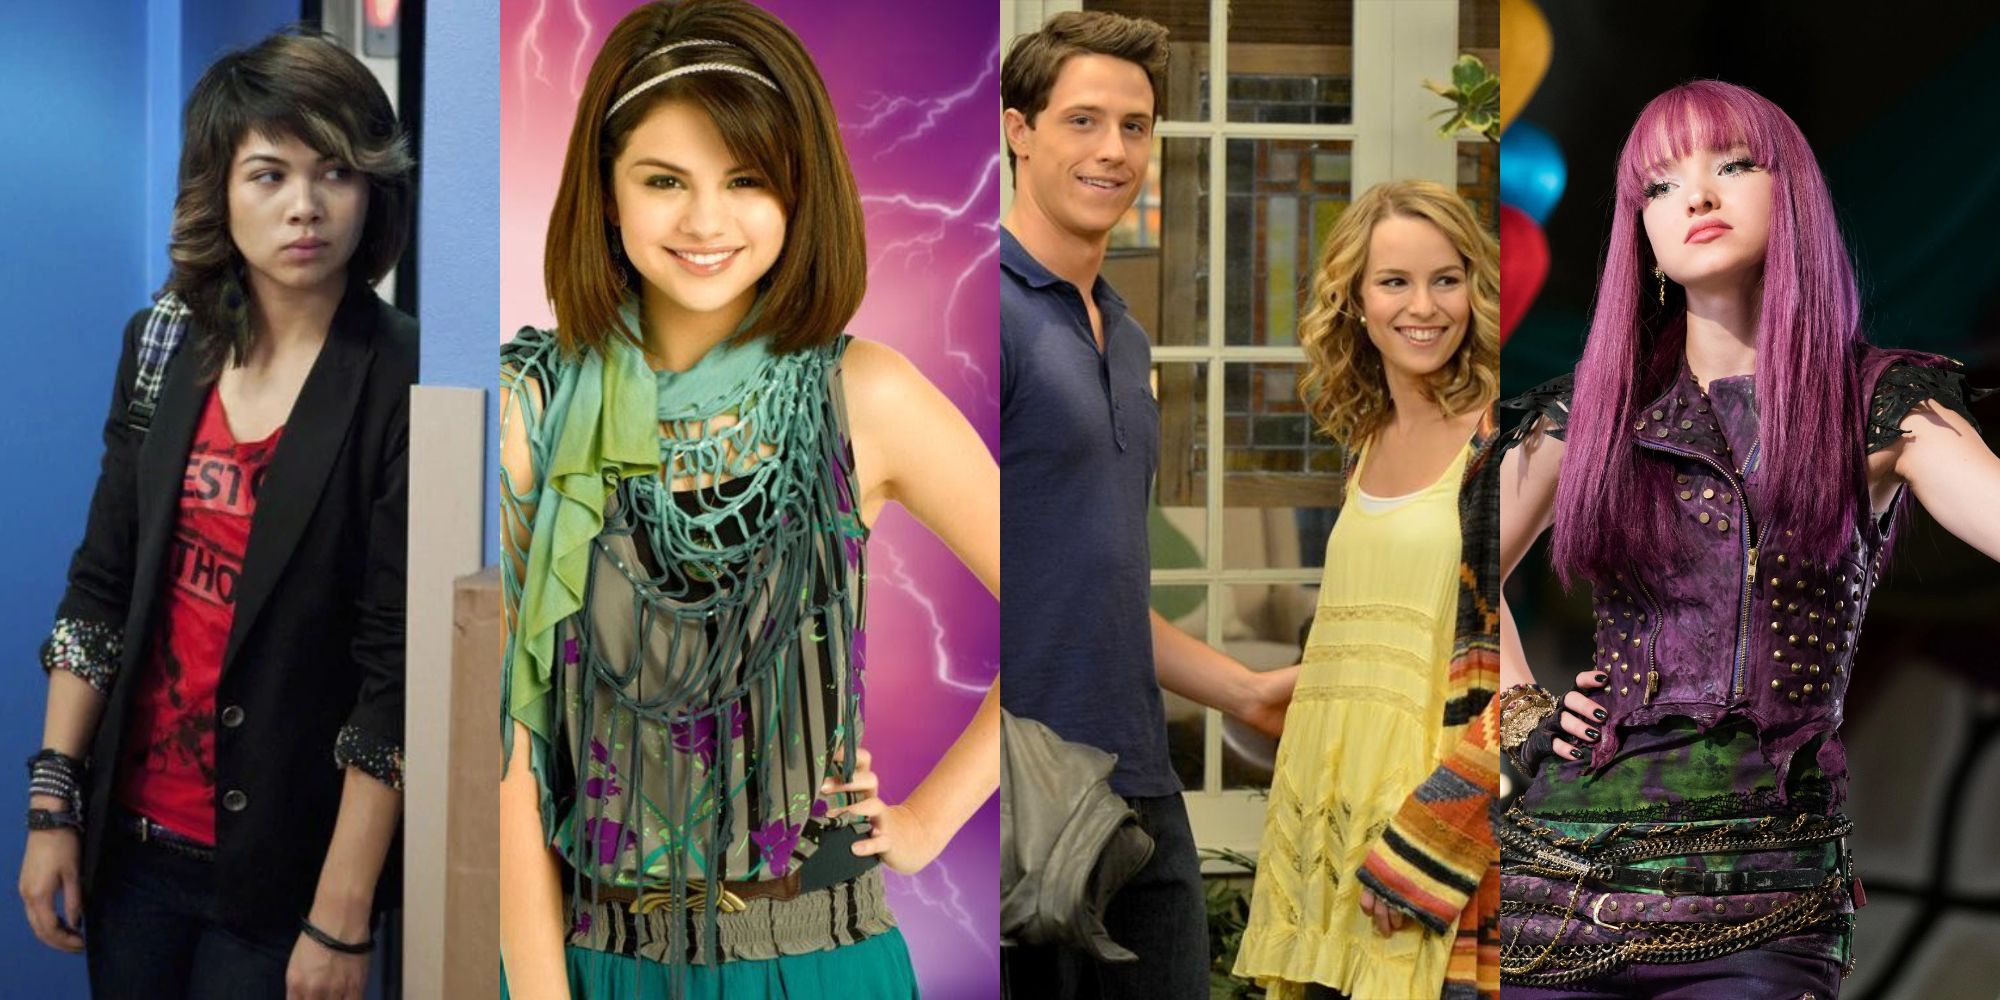 10 Former Disney Channel Stars Turned Singers, Ranked by Spotify Streams